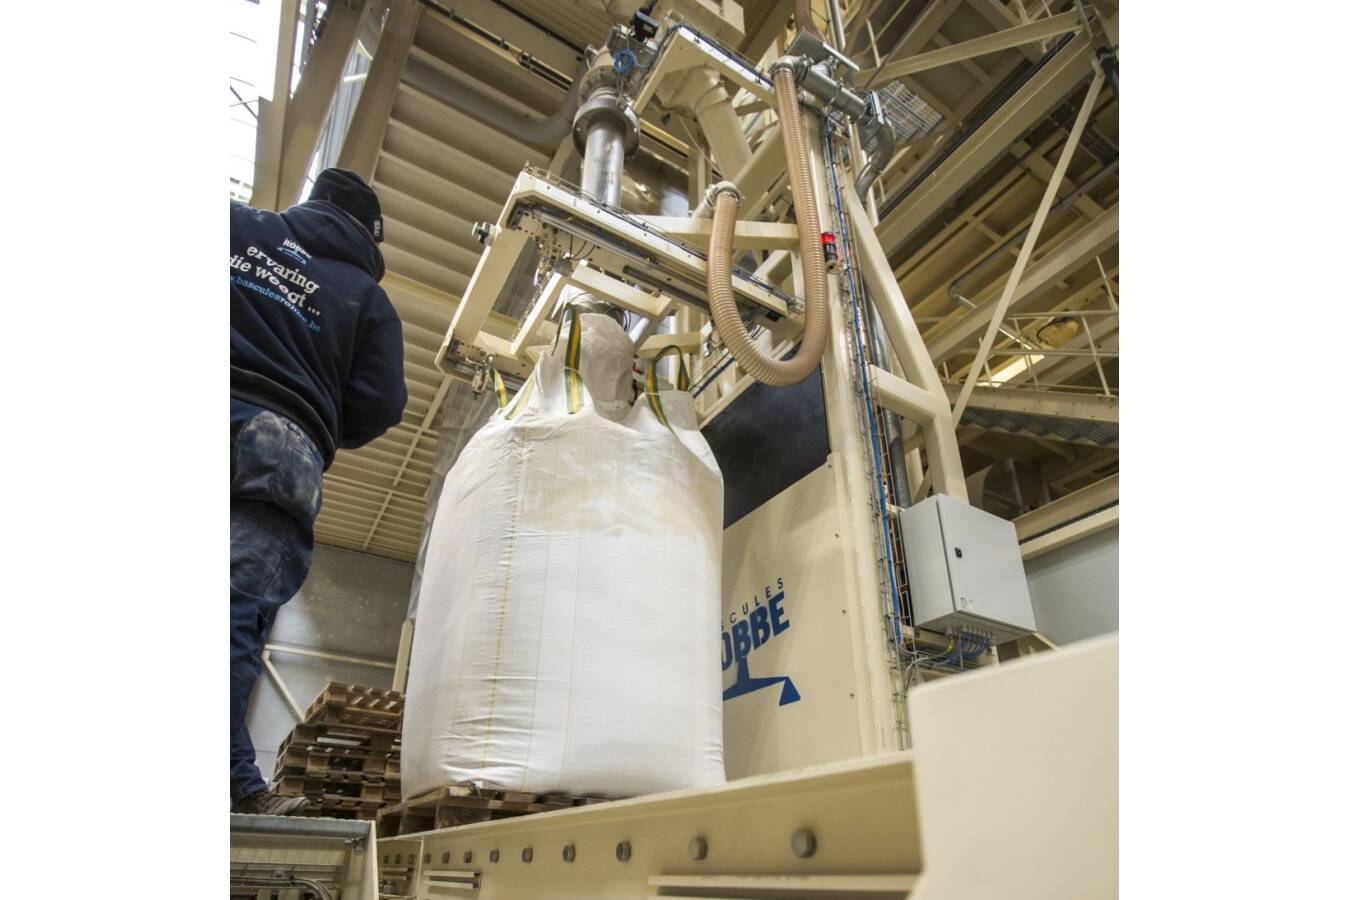 Automated filling: all data on the filled big bags can be logged and consulted to inspect the actual production results